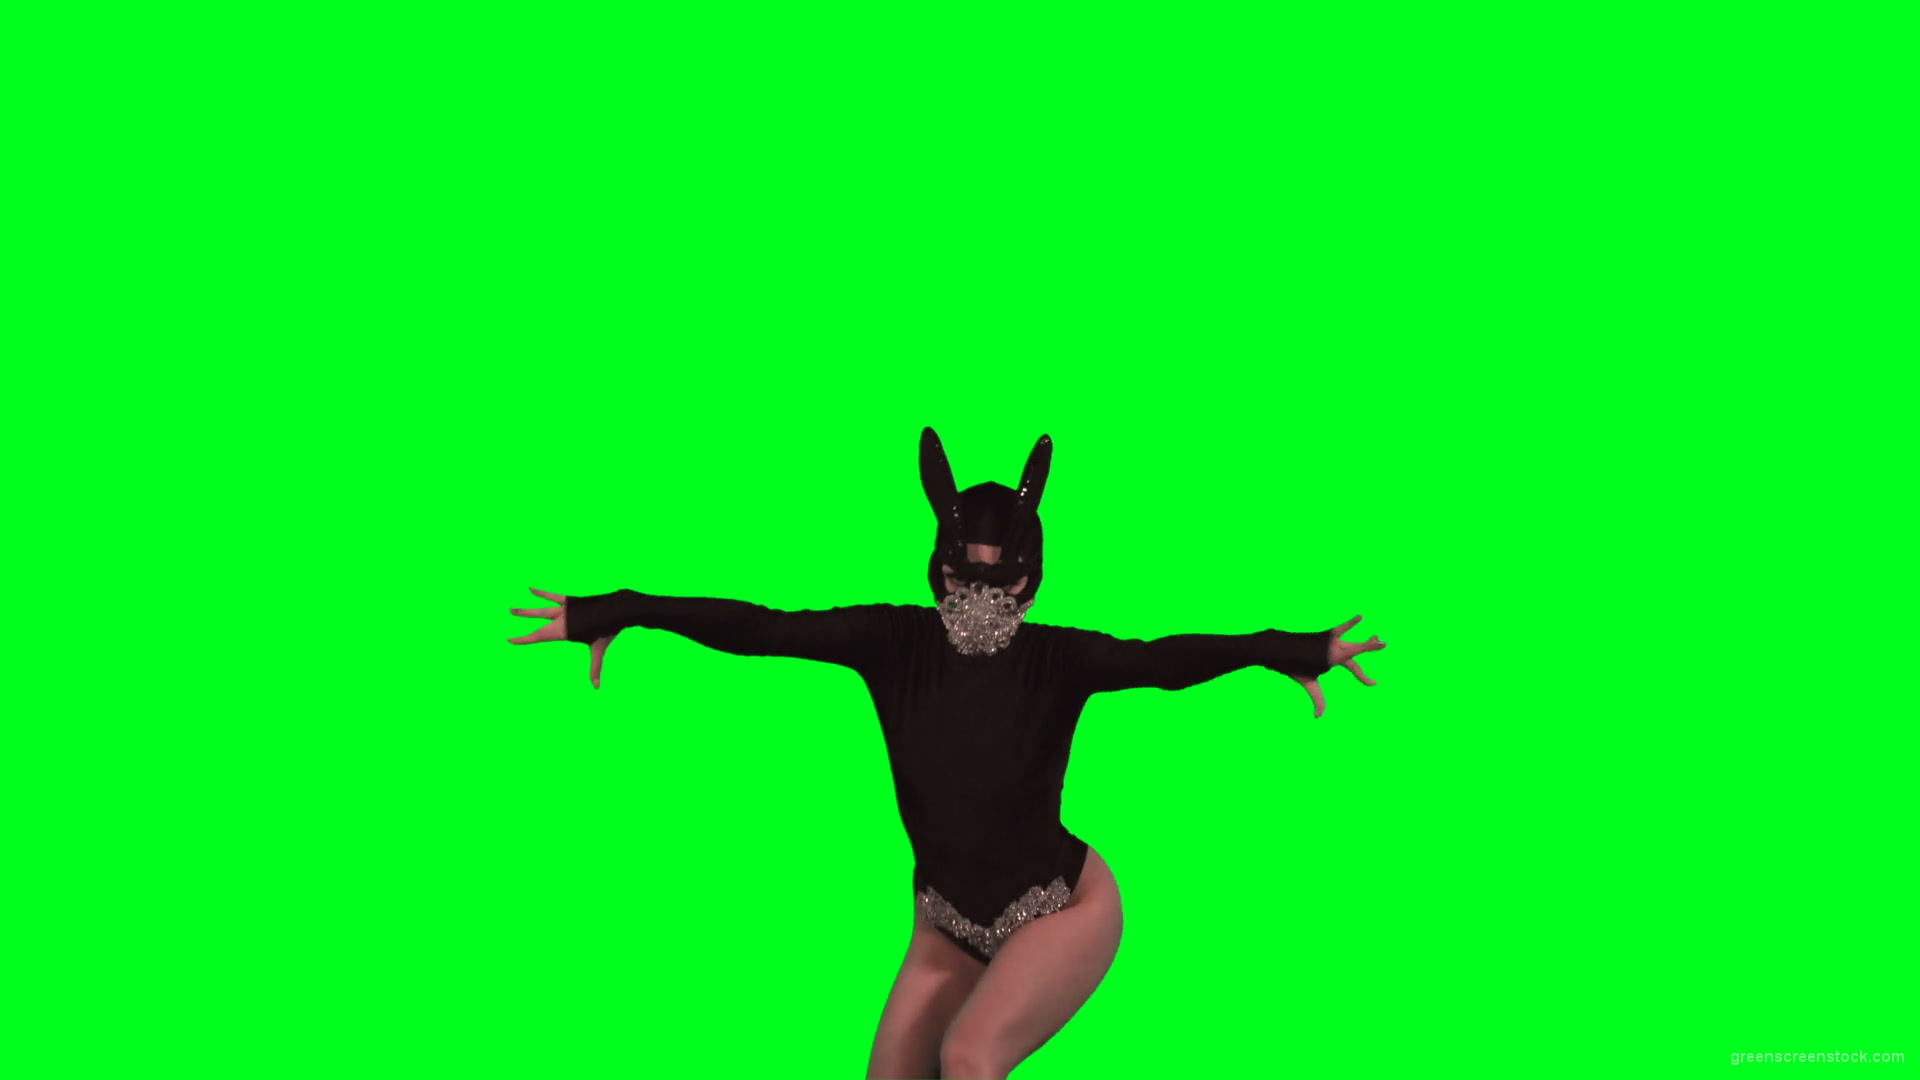 Rave-Calling-EDM-Go-Go-Dancing-Girl-performs-on-green-screen-4K-Video-Footage-1920_005 Green Screen Stock